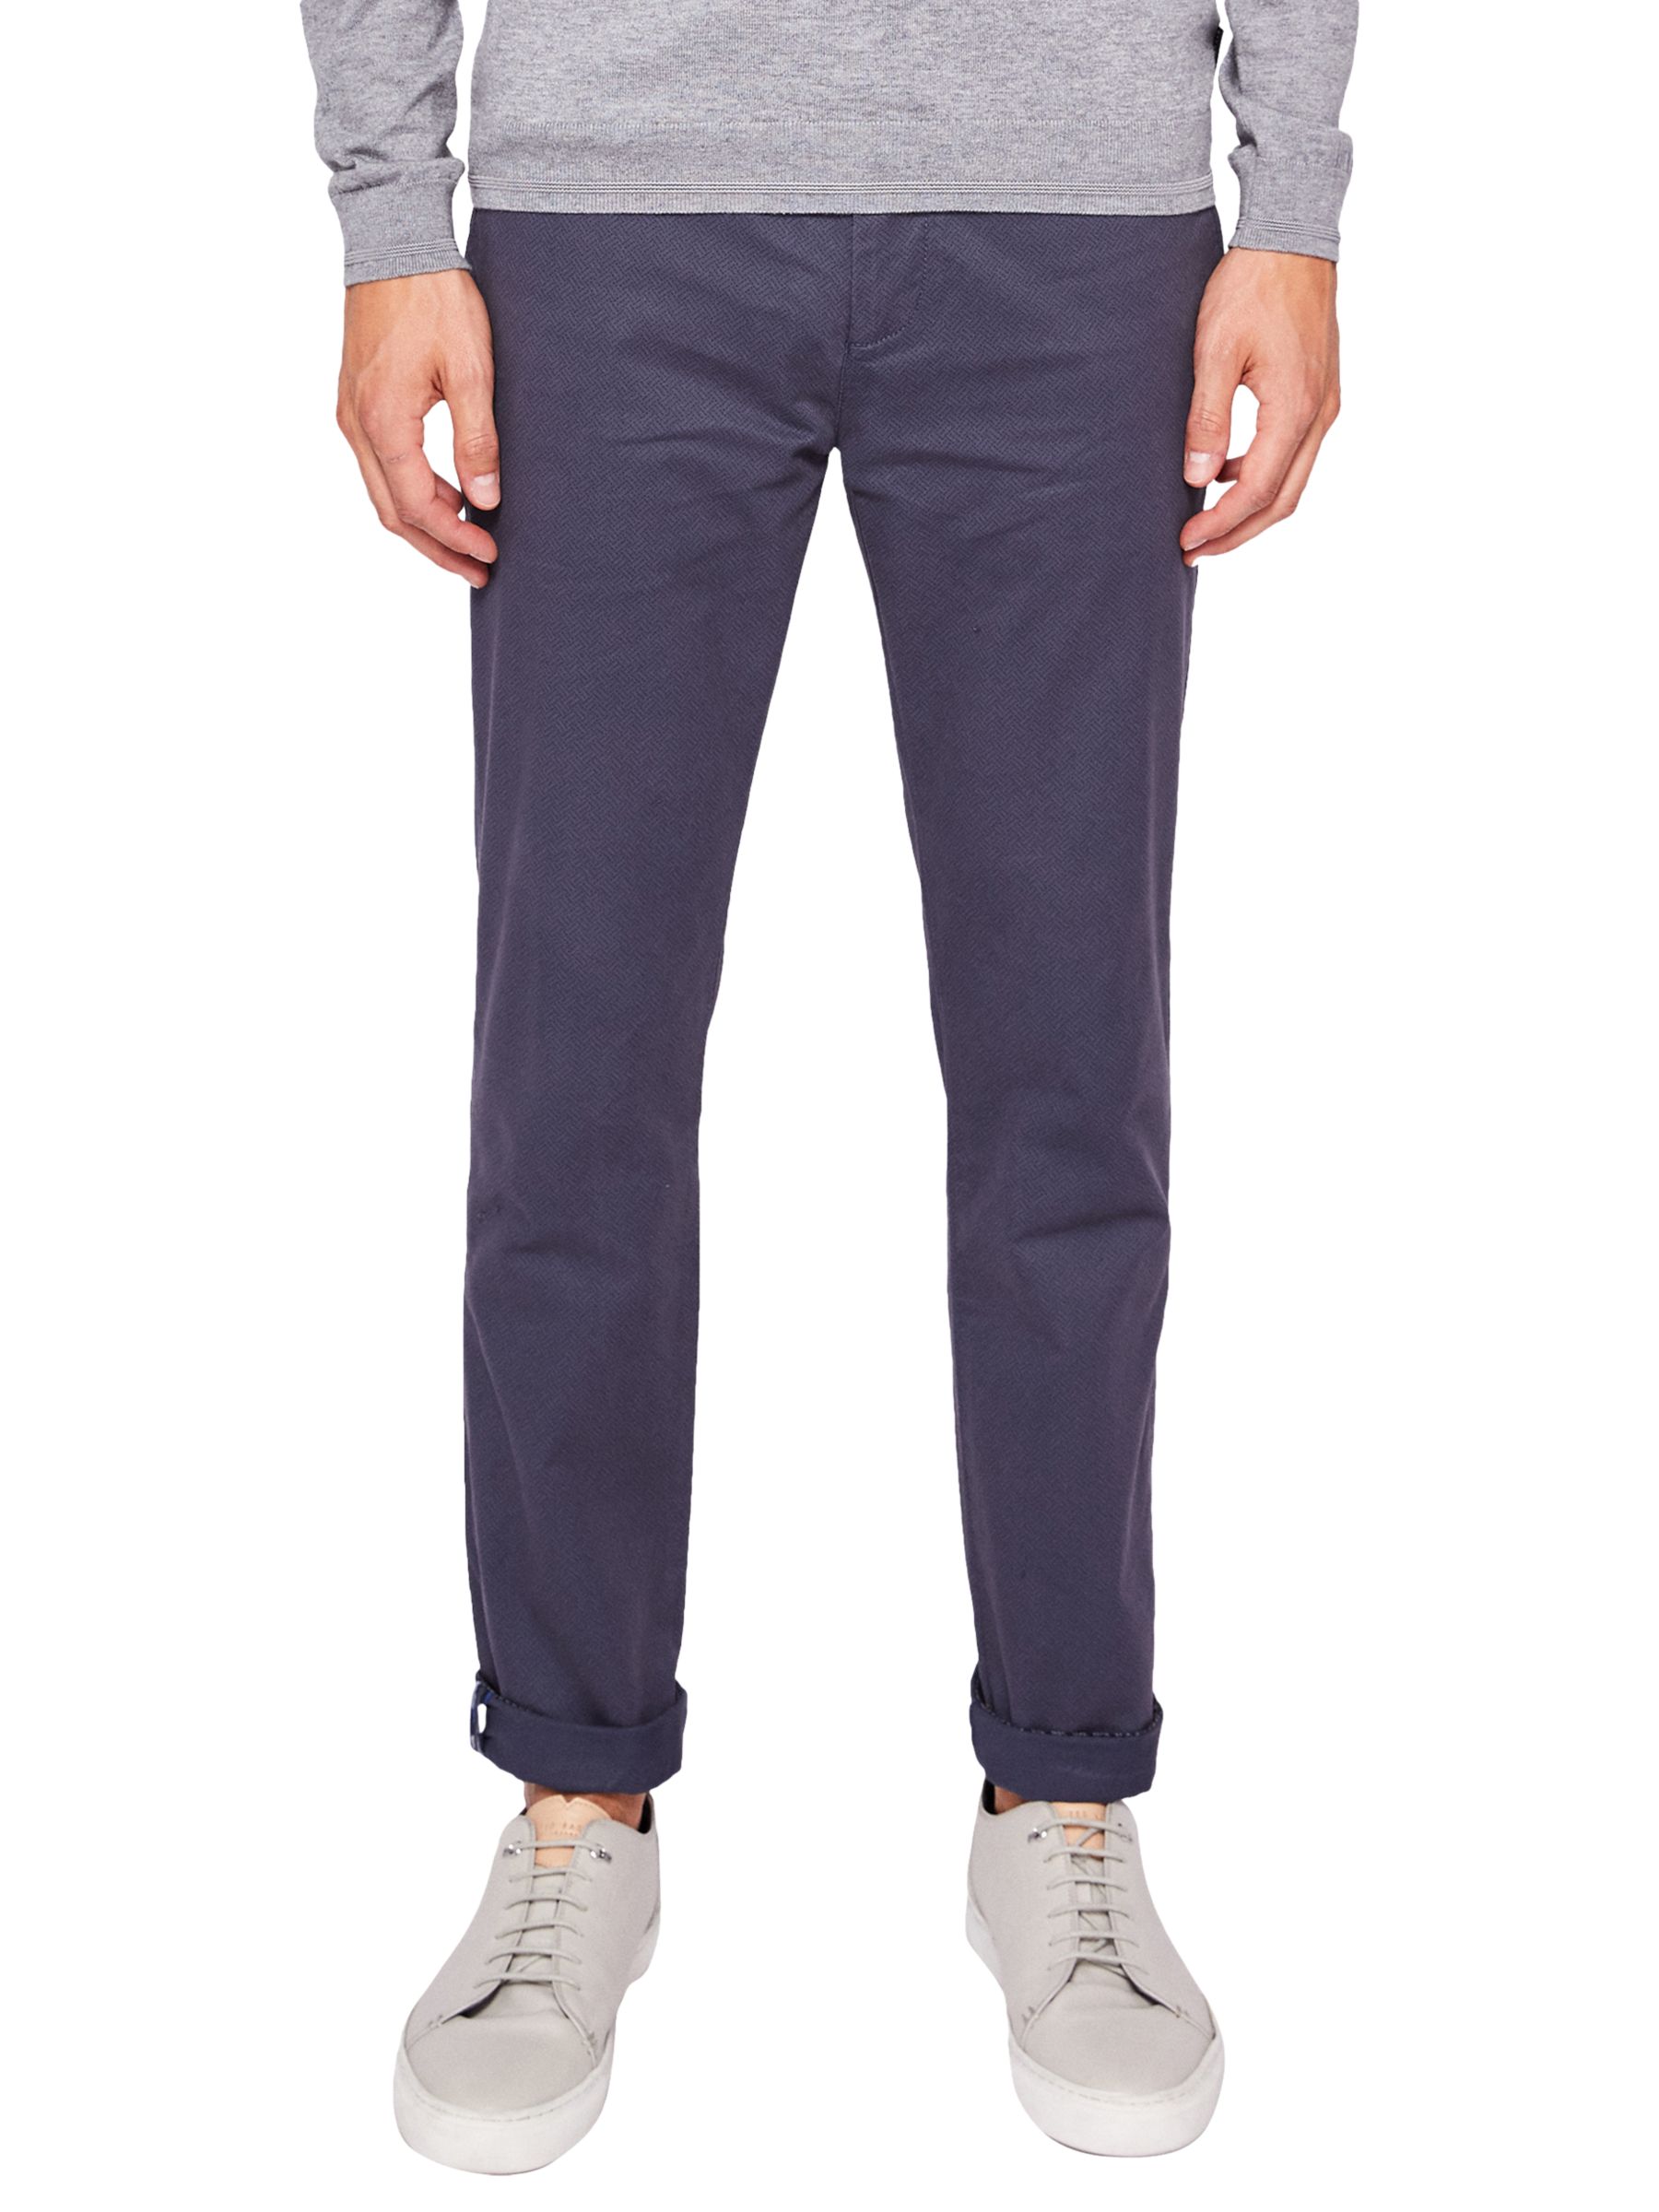 Ted Baker Tarprin Tapered Fit Chinos Review